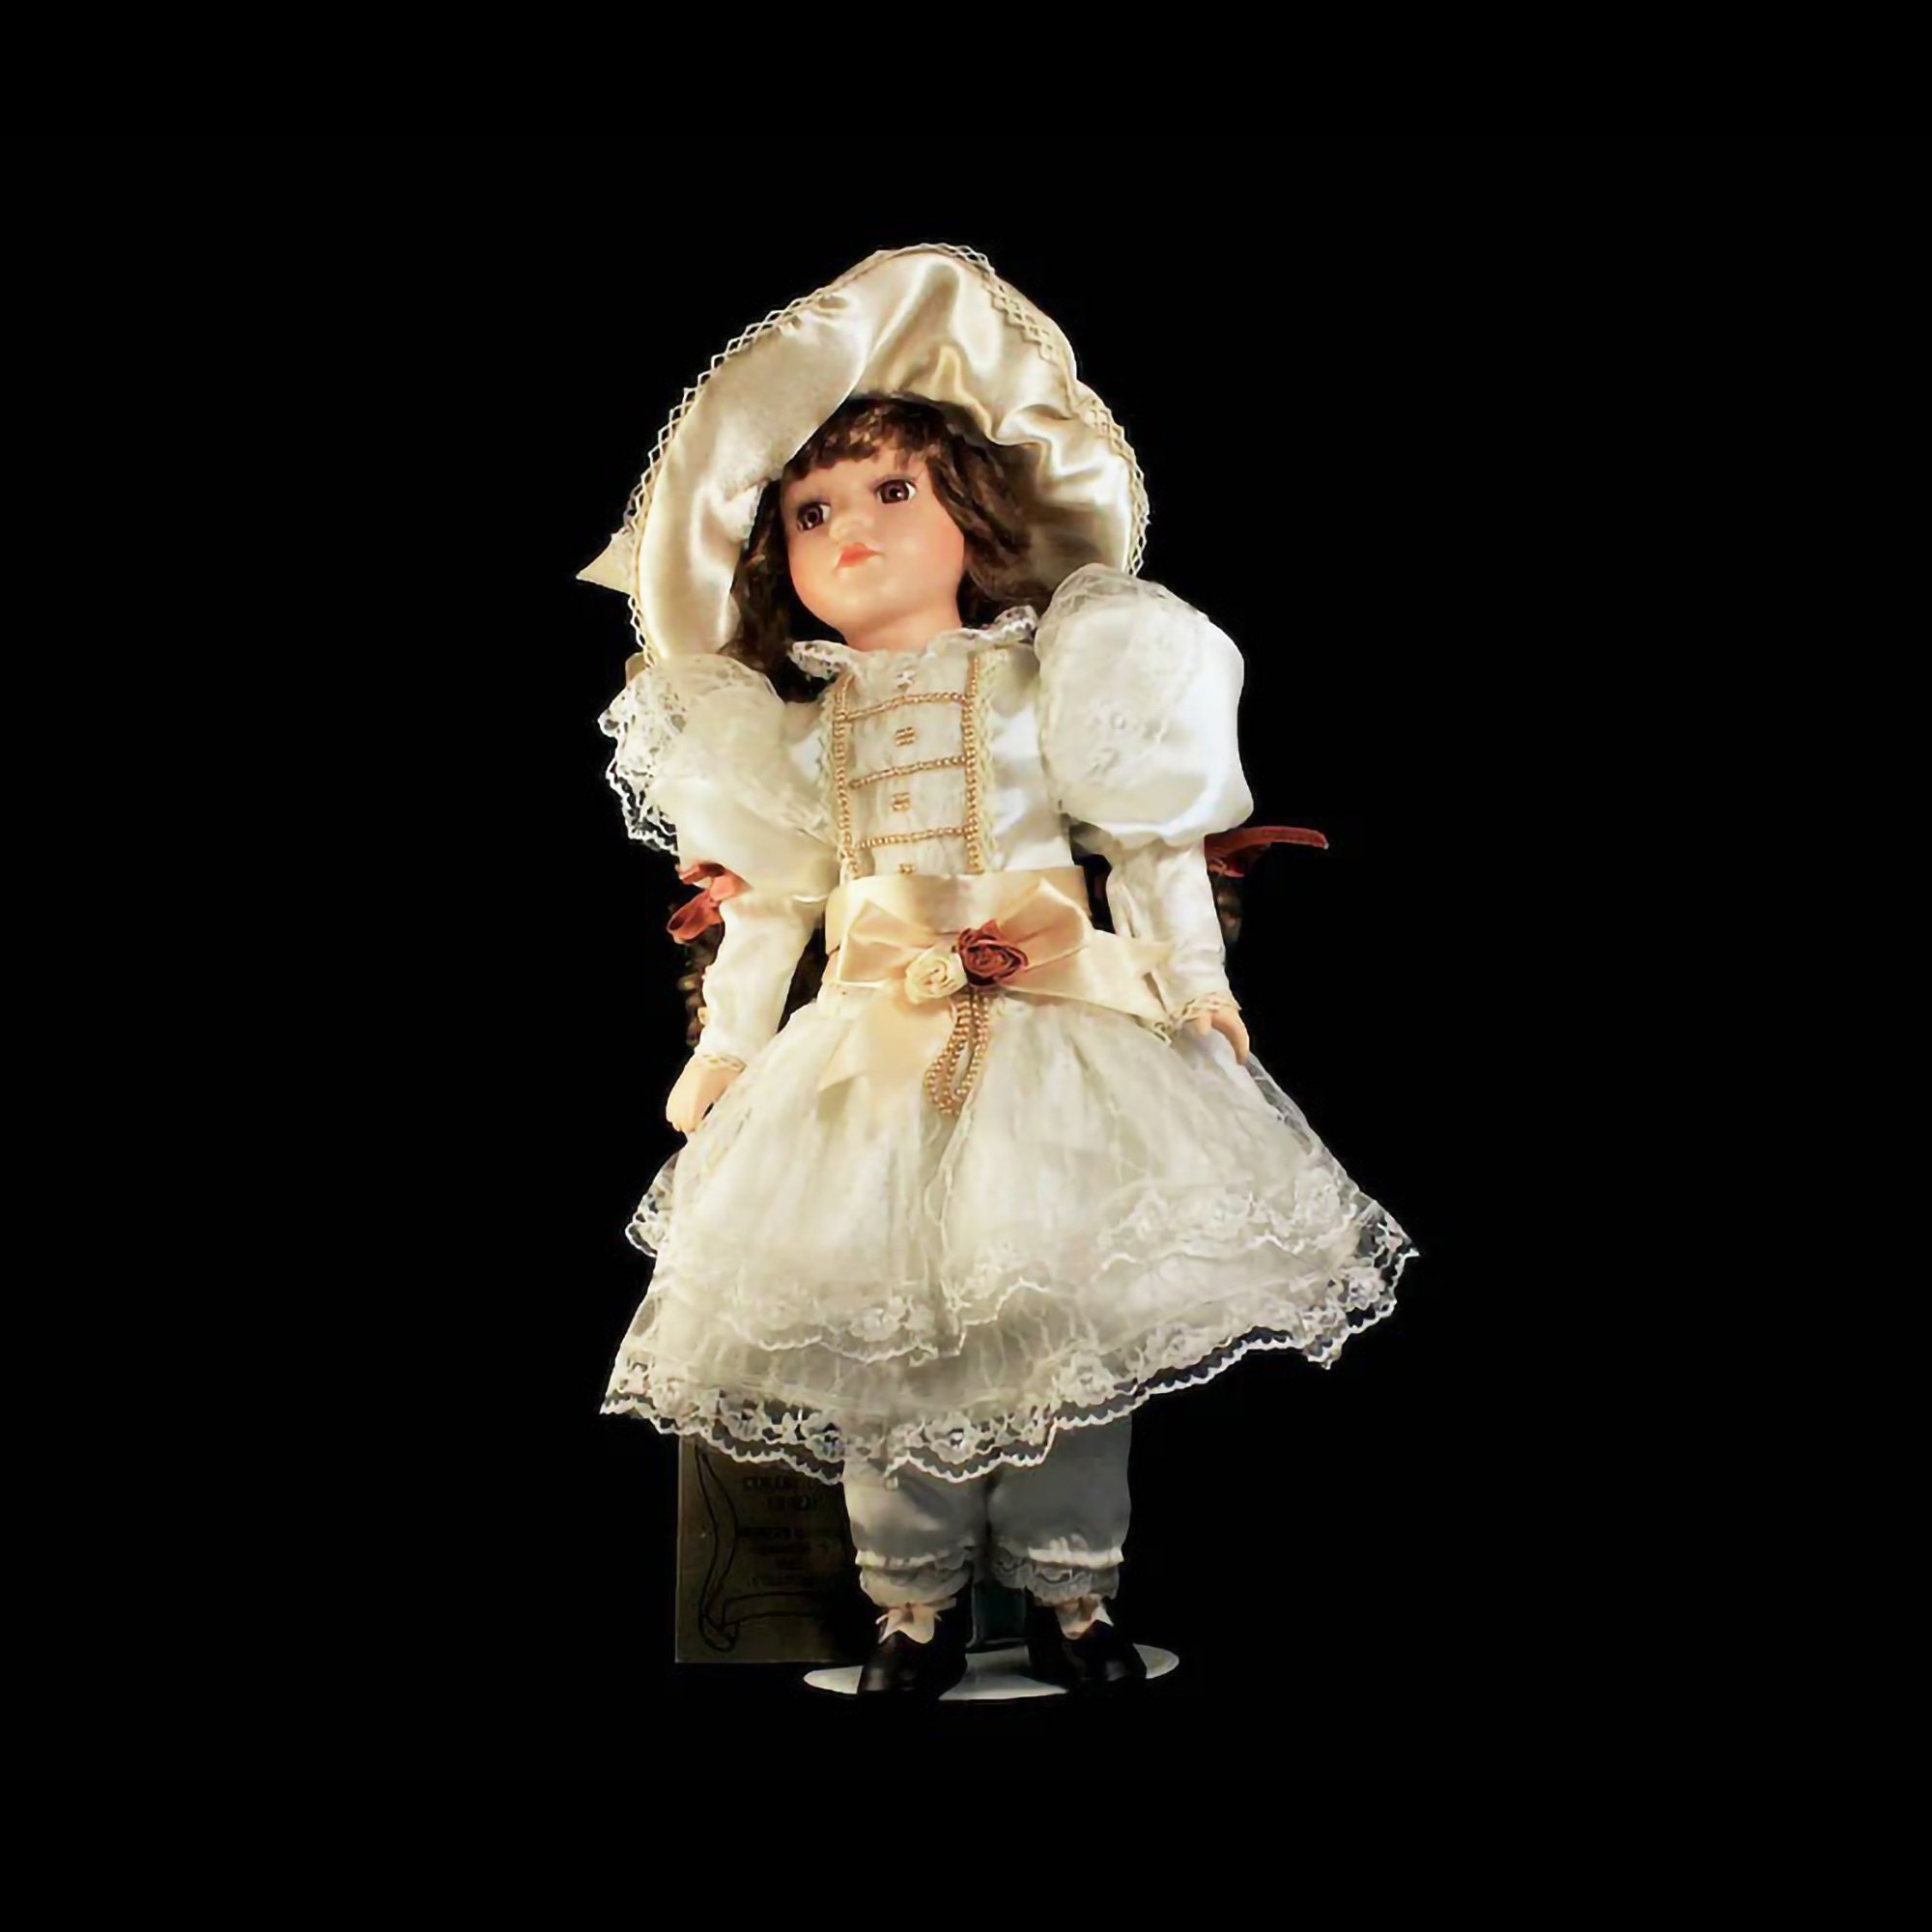 Porcelain Doll, Seymour Mann, Connoisseur Collection, Consuela, Victorian  Doll, White Dress, Hand Painted, Tags Attached, 16 Inches